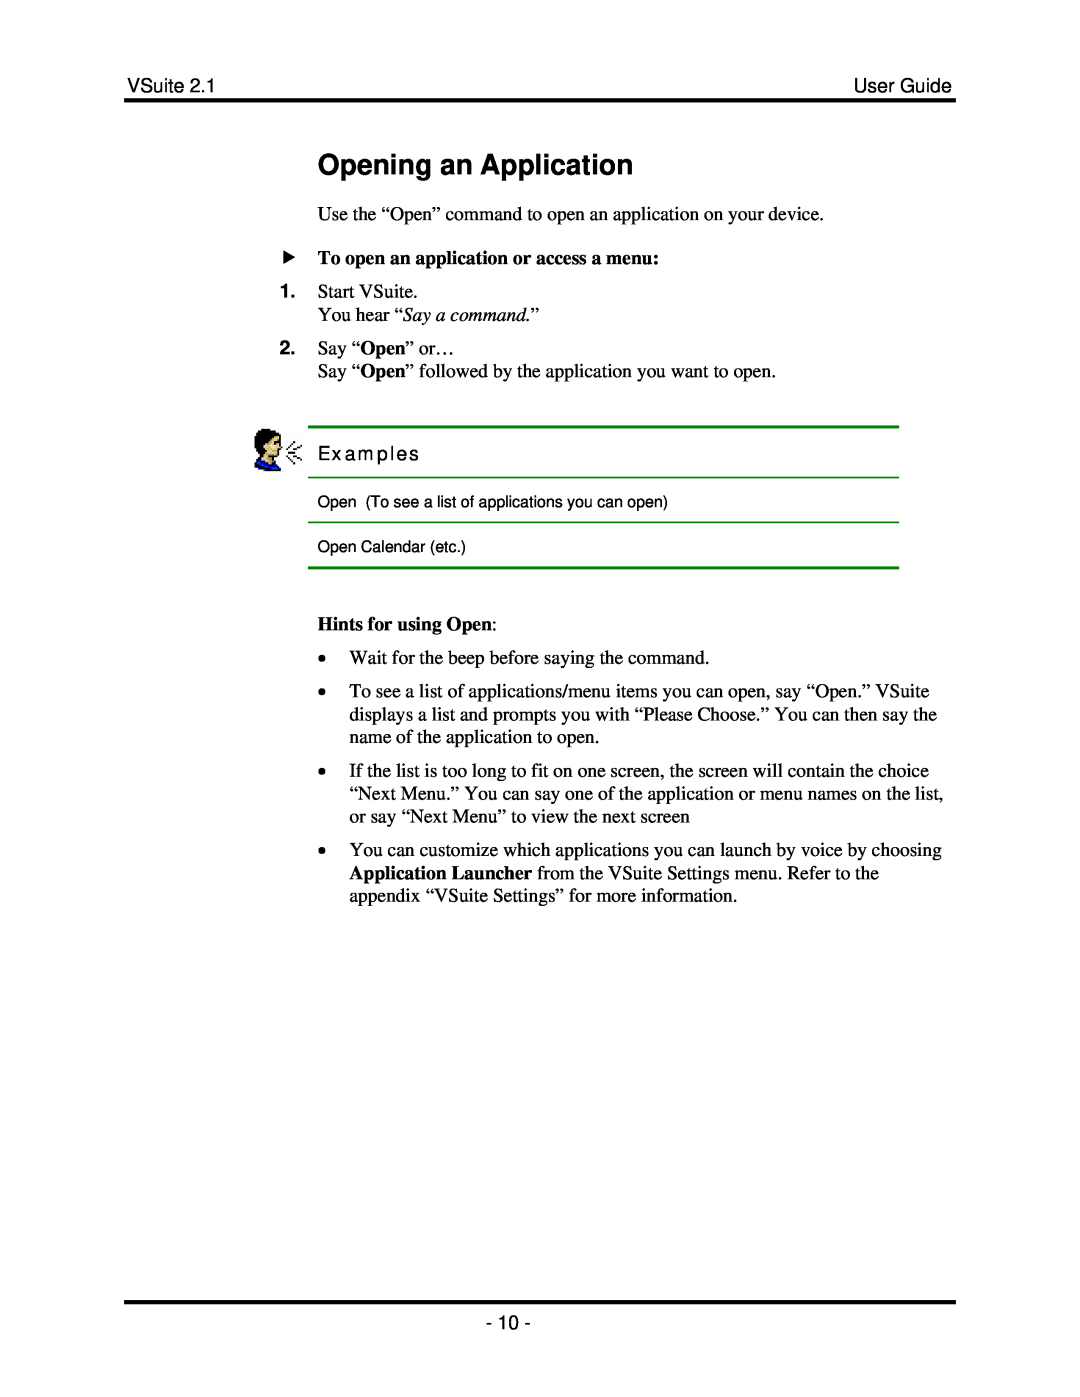 Motorola 2.1 manual Opening an Application, f To open an application or access a menu, Hints for using Open, Examples 